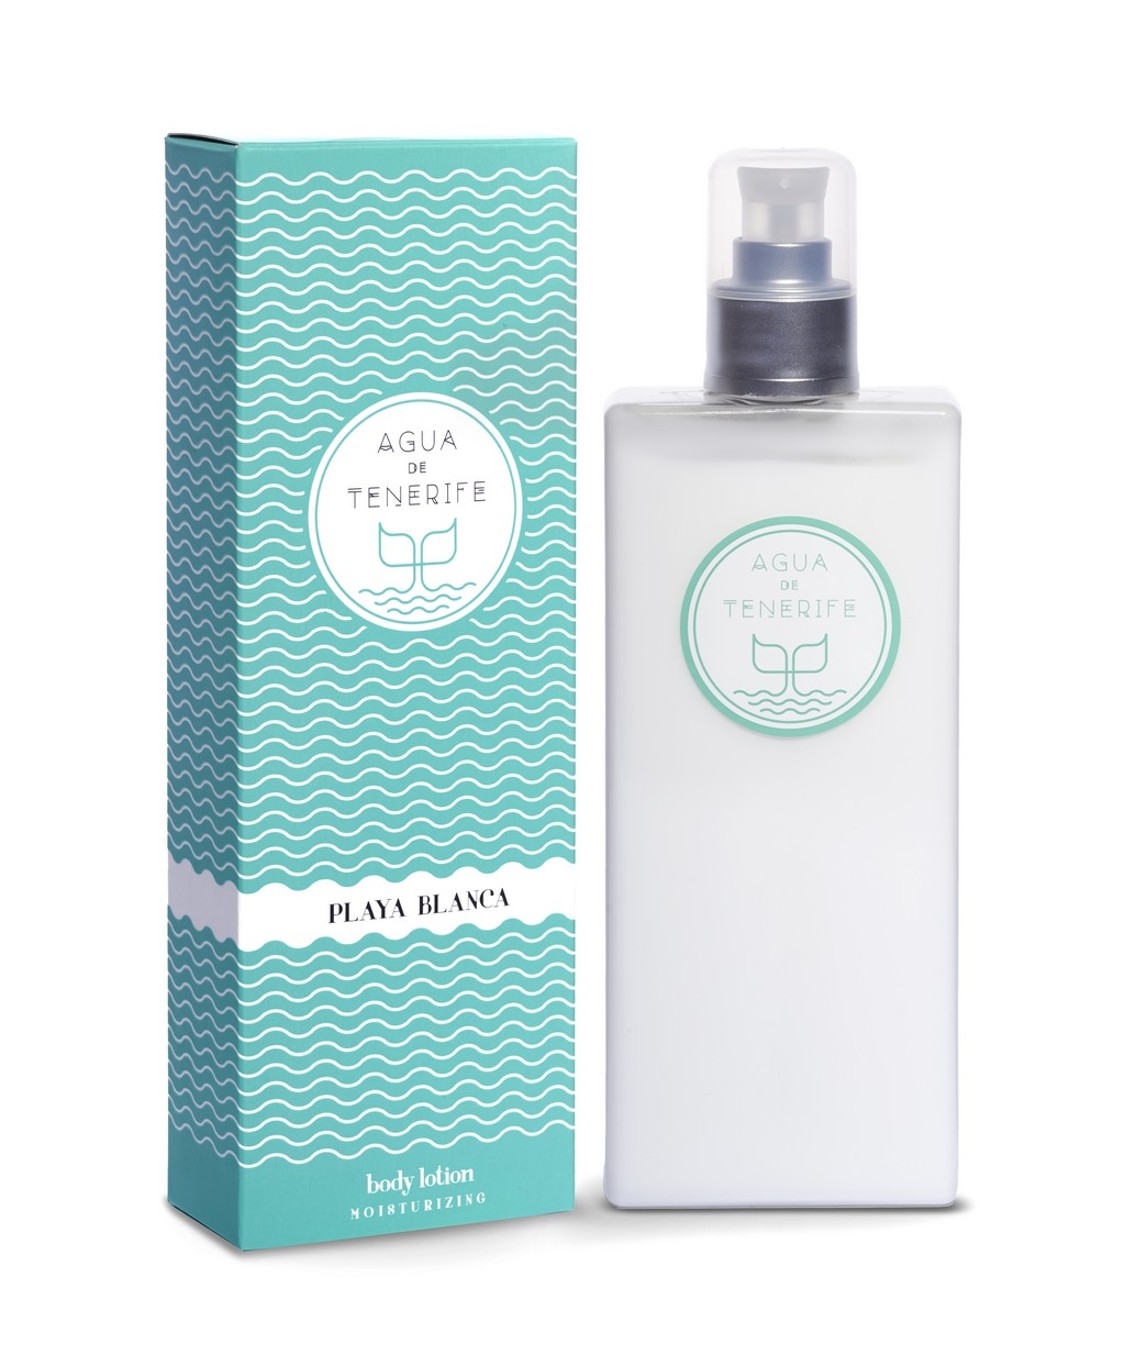 shop Agua de Tenerife  LAS FRAGANCIAS DE LA ISLA: Playa Blanca Body Lotion 250 ml.
An exclusive, sweet and passionate fragrance, inspired by the uncontaminated coasts of Tenerife. number 19